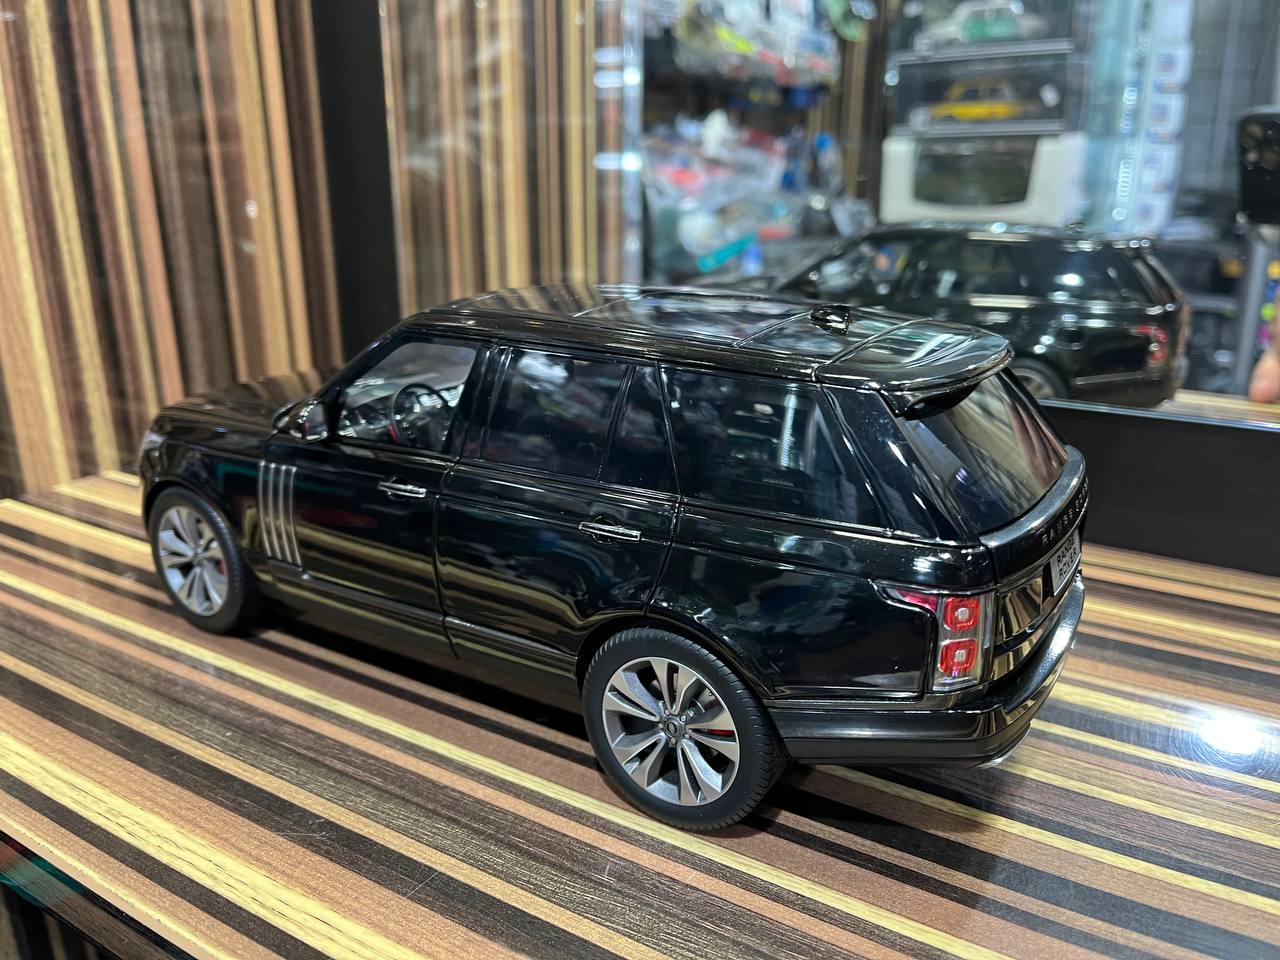 LCD Land Rover Range Rover - 1/18 Diecast Model, All Opening - Black